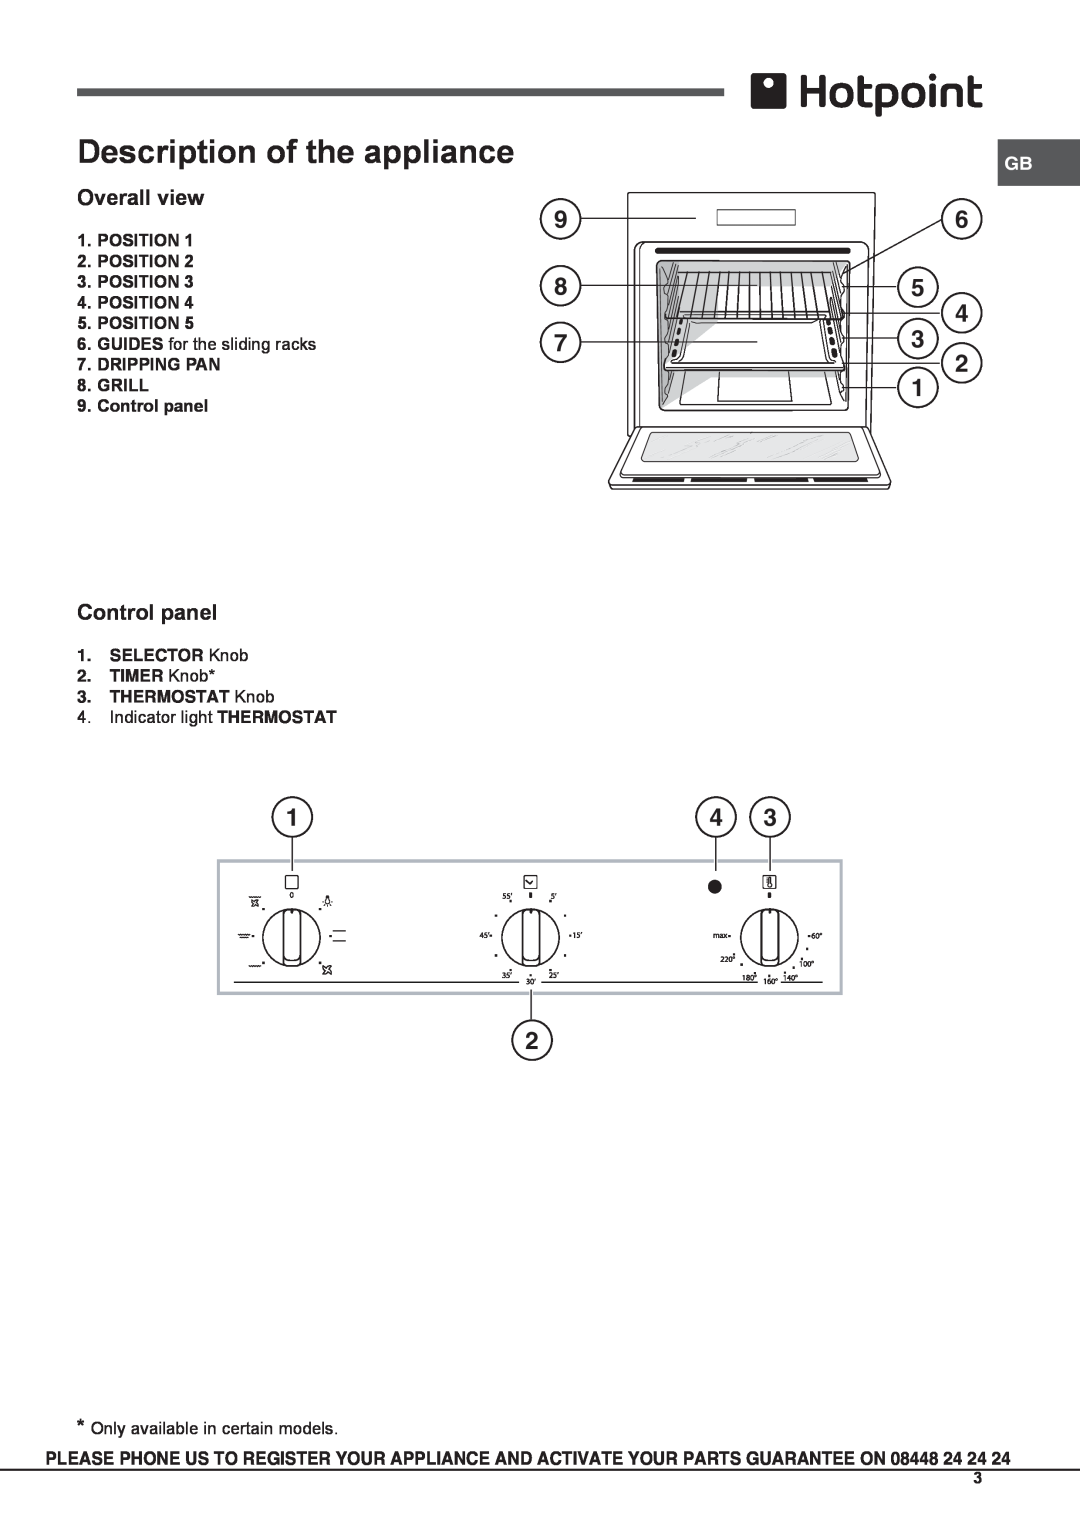 Hotpoint SBS 51 X S Description of the appliance, Overall view, Control panel, Position, GUIDES for the sliding racks 